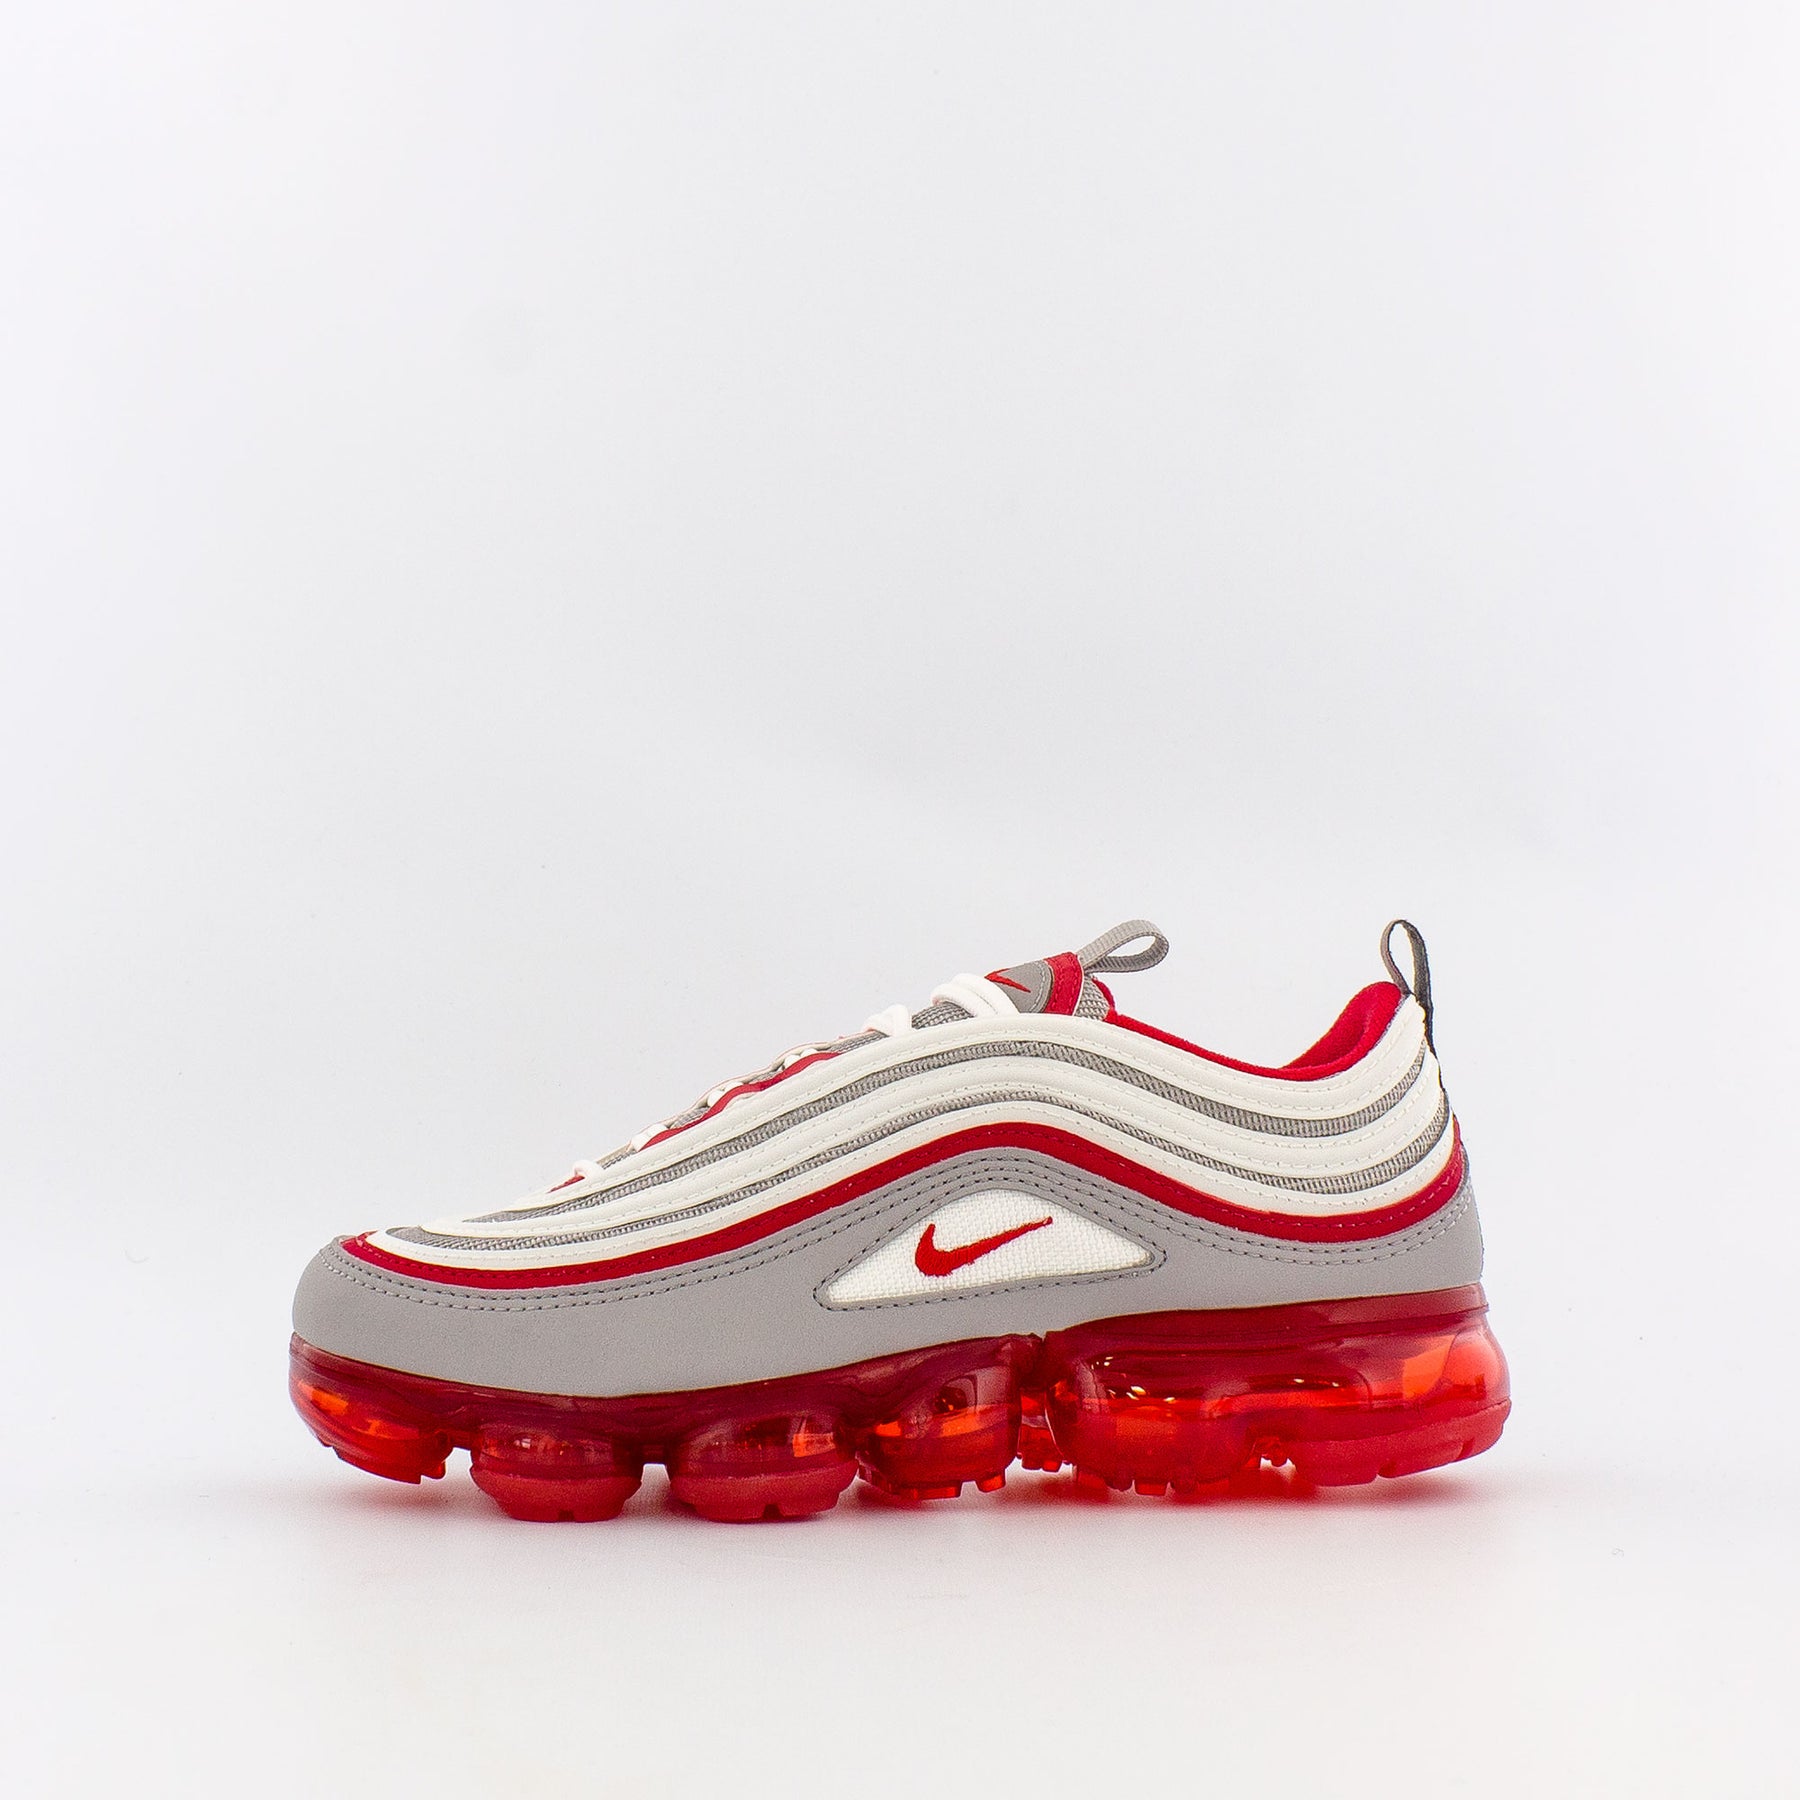 vapormax 97 all red